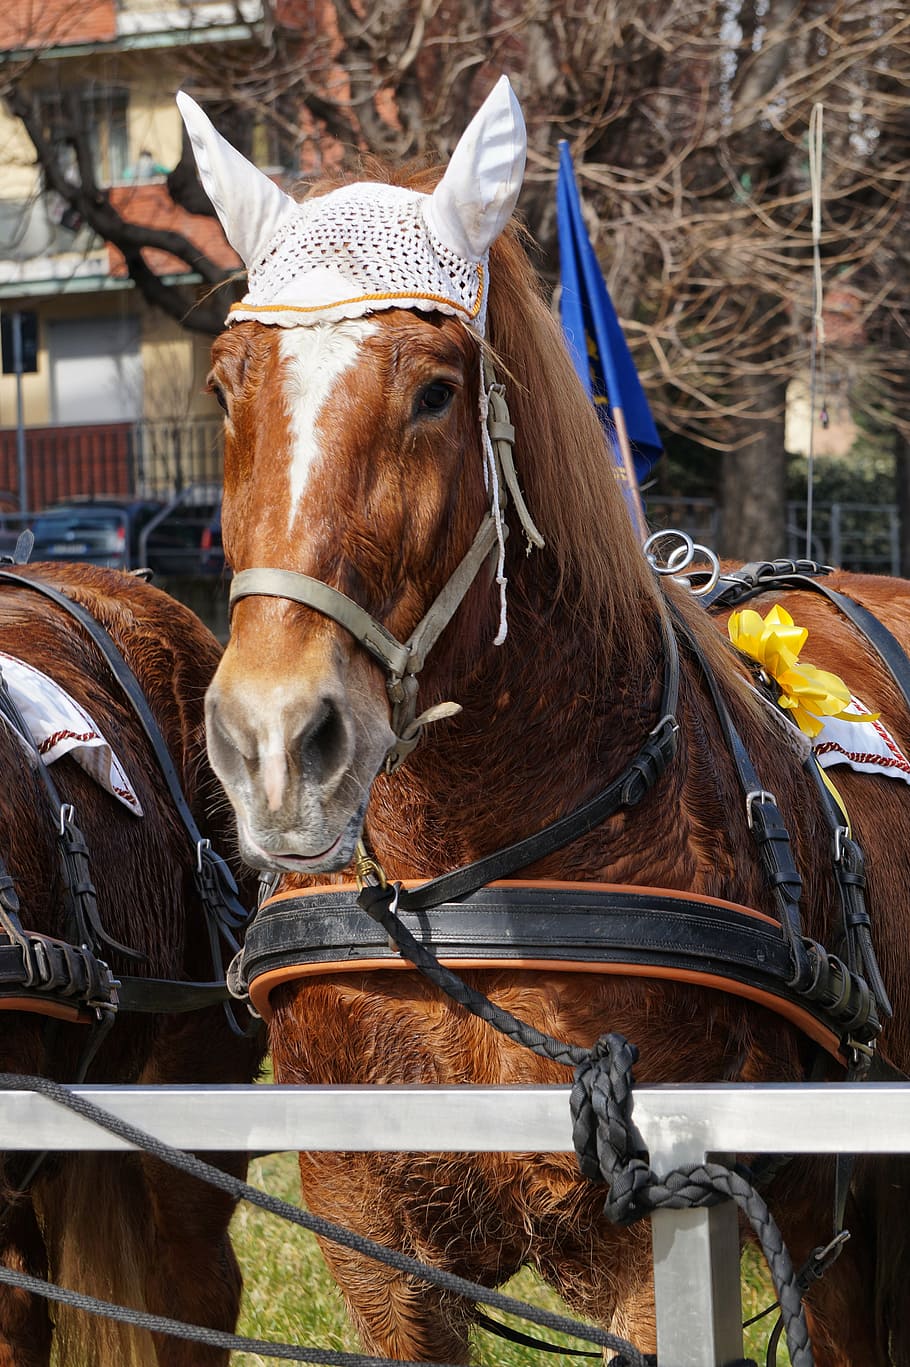 horse, baio, brown, earmuffs, bow, yellow, harness, picket fence, livestock, domestic animals